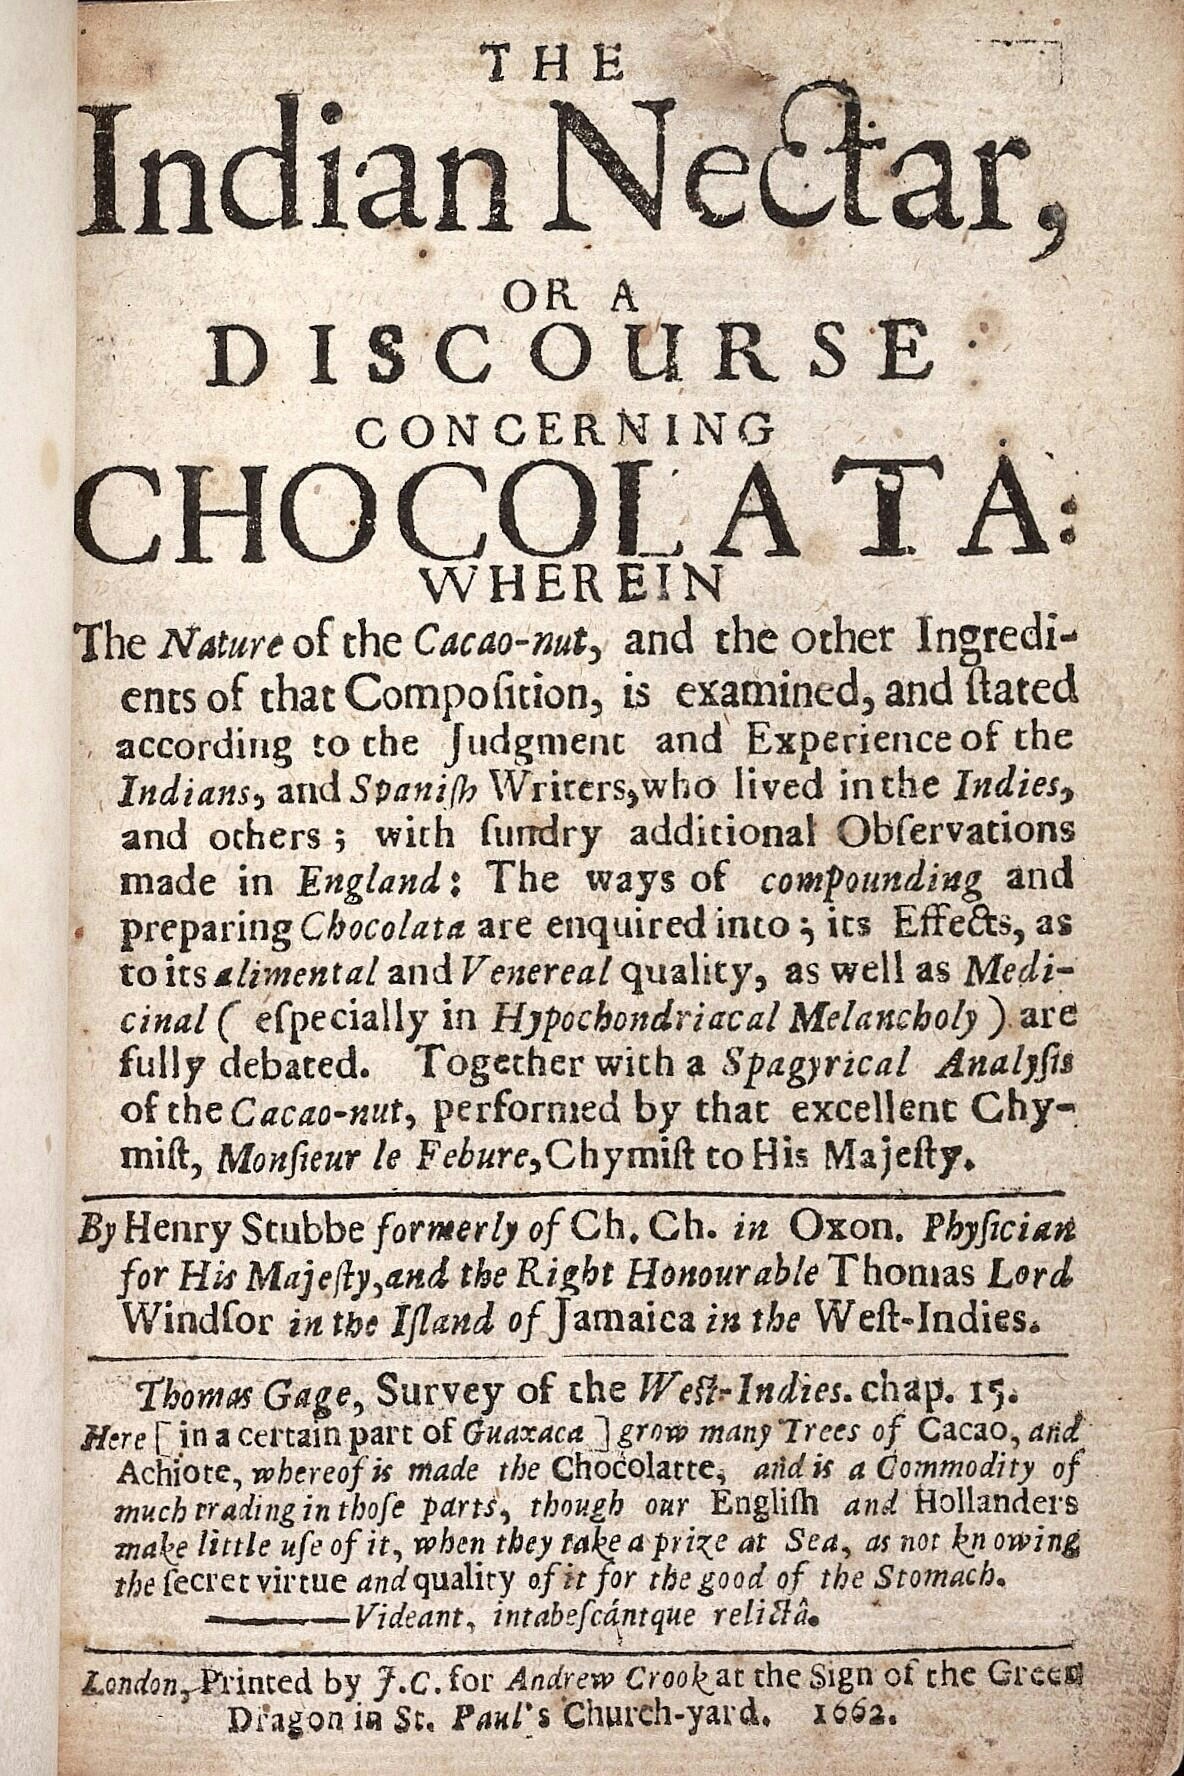 Title page of 'The Indian Nectar, or, A discourse concerning Chocolata' by Henry Stubbe.